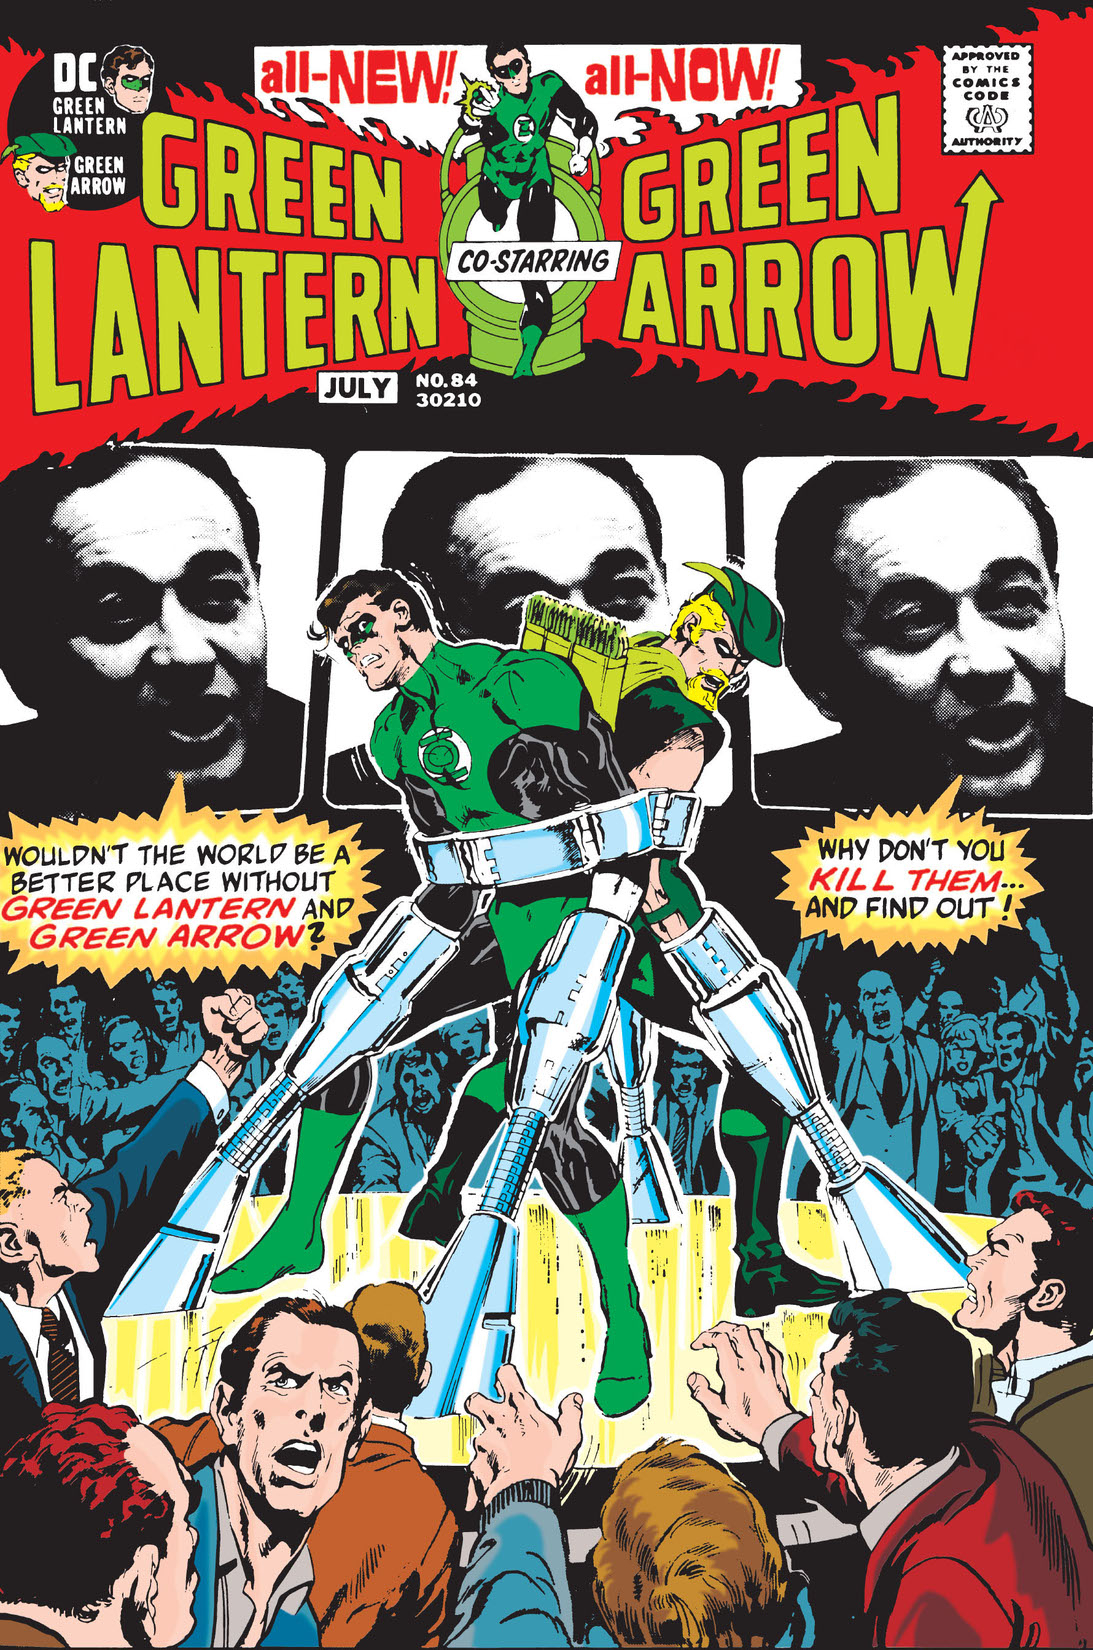 Green Lantern (1960-) #84 preview images